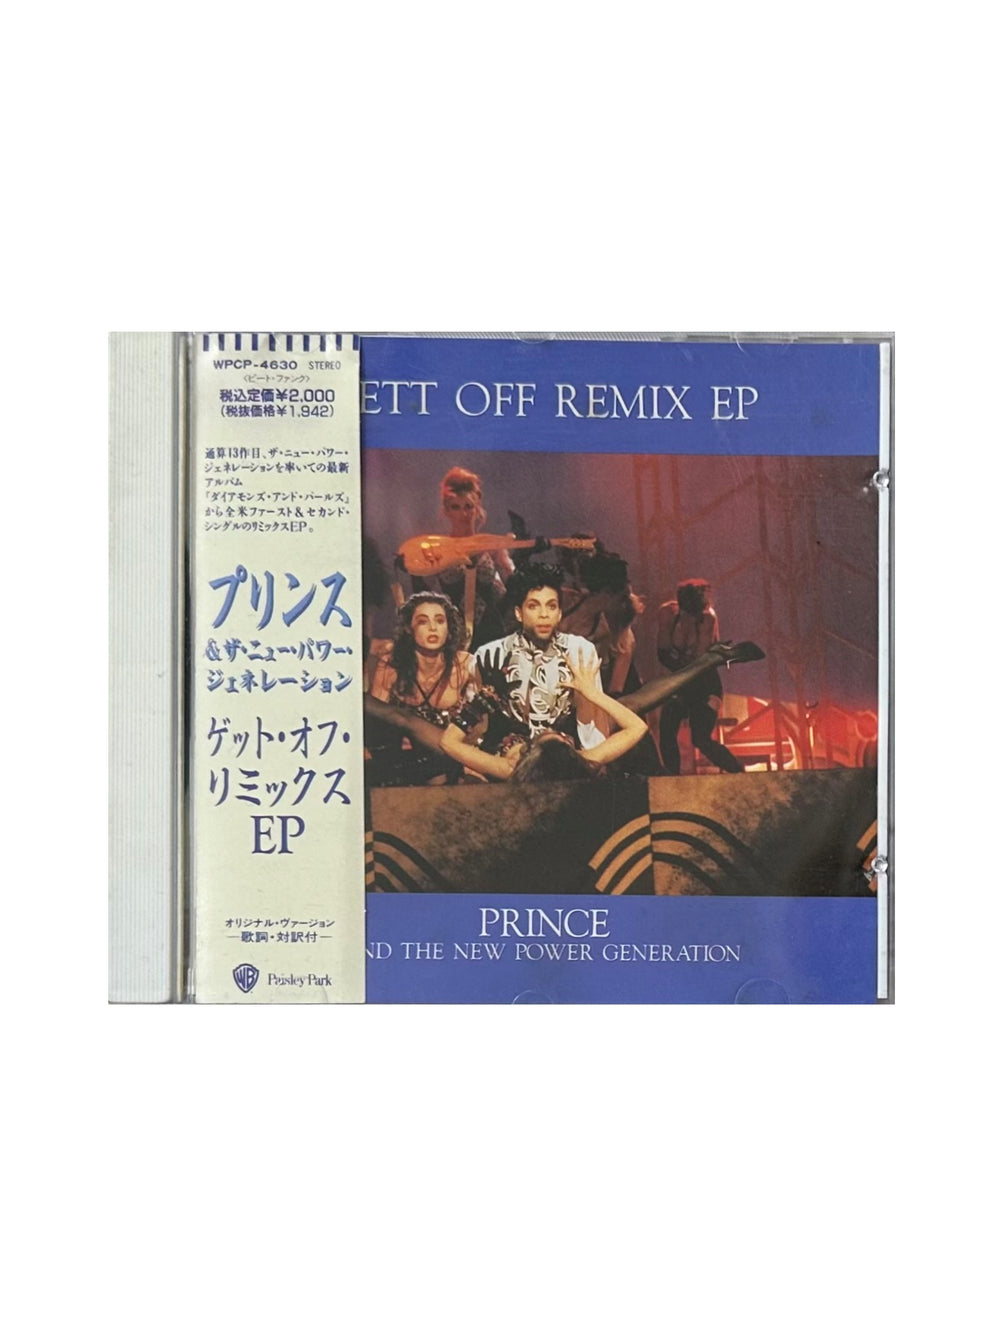 Prince – & The New Power Generation – GETT OFF CD EP with OBI Japan Preloved: 1991